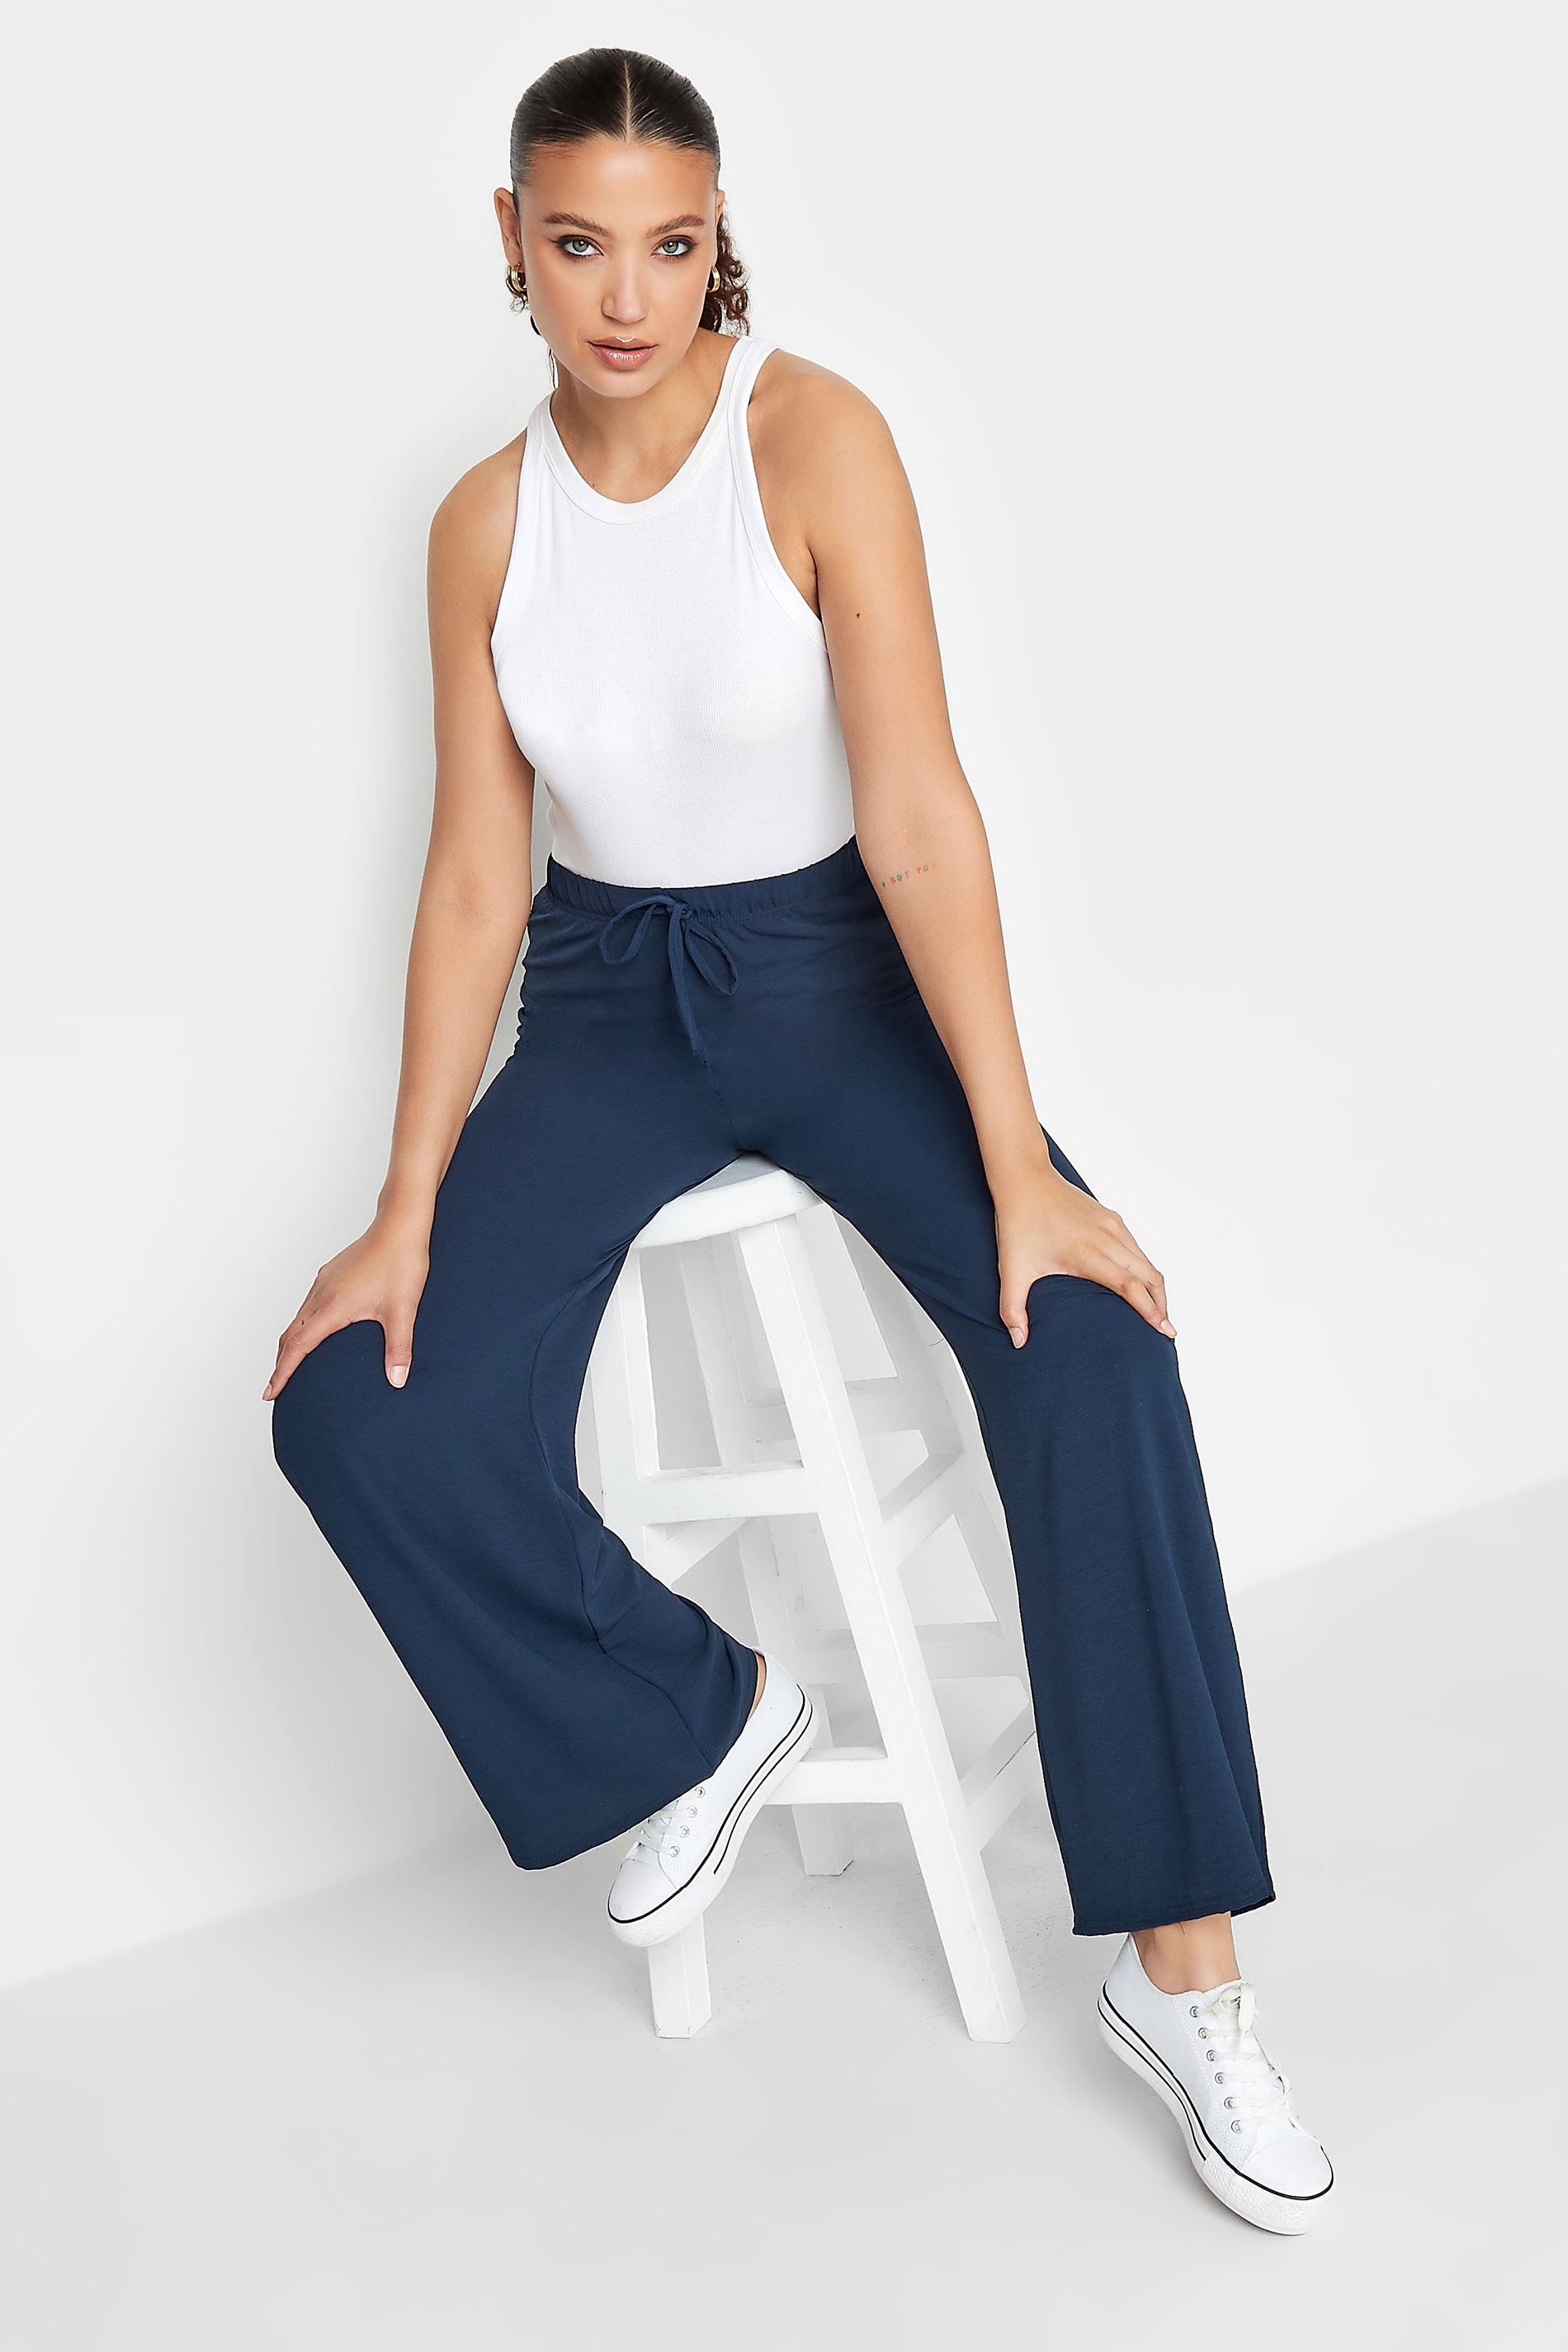 LTS Tall Navy Blue Crepe Wide Leg Trousers | Long Tall Sally 2